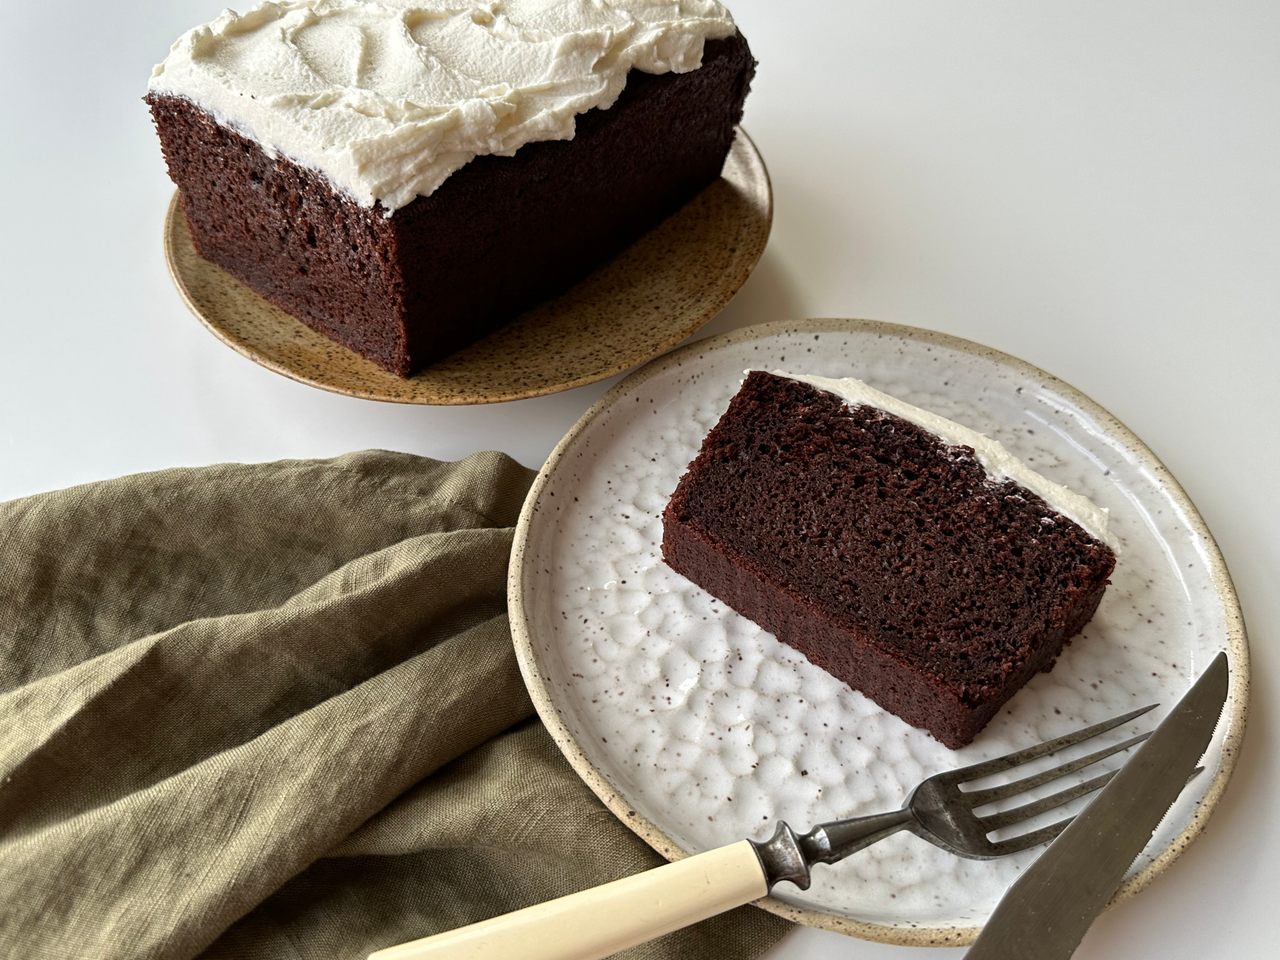 The first “red” chocolate cakes were barely red at all.